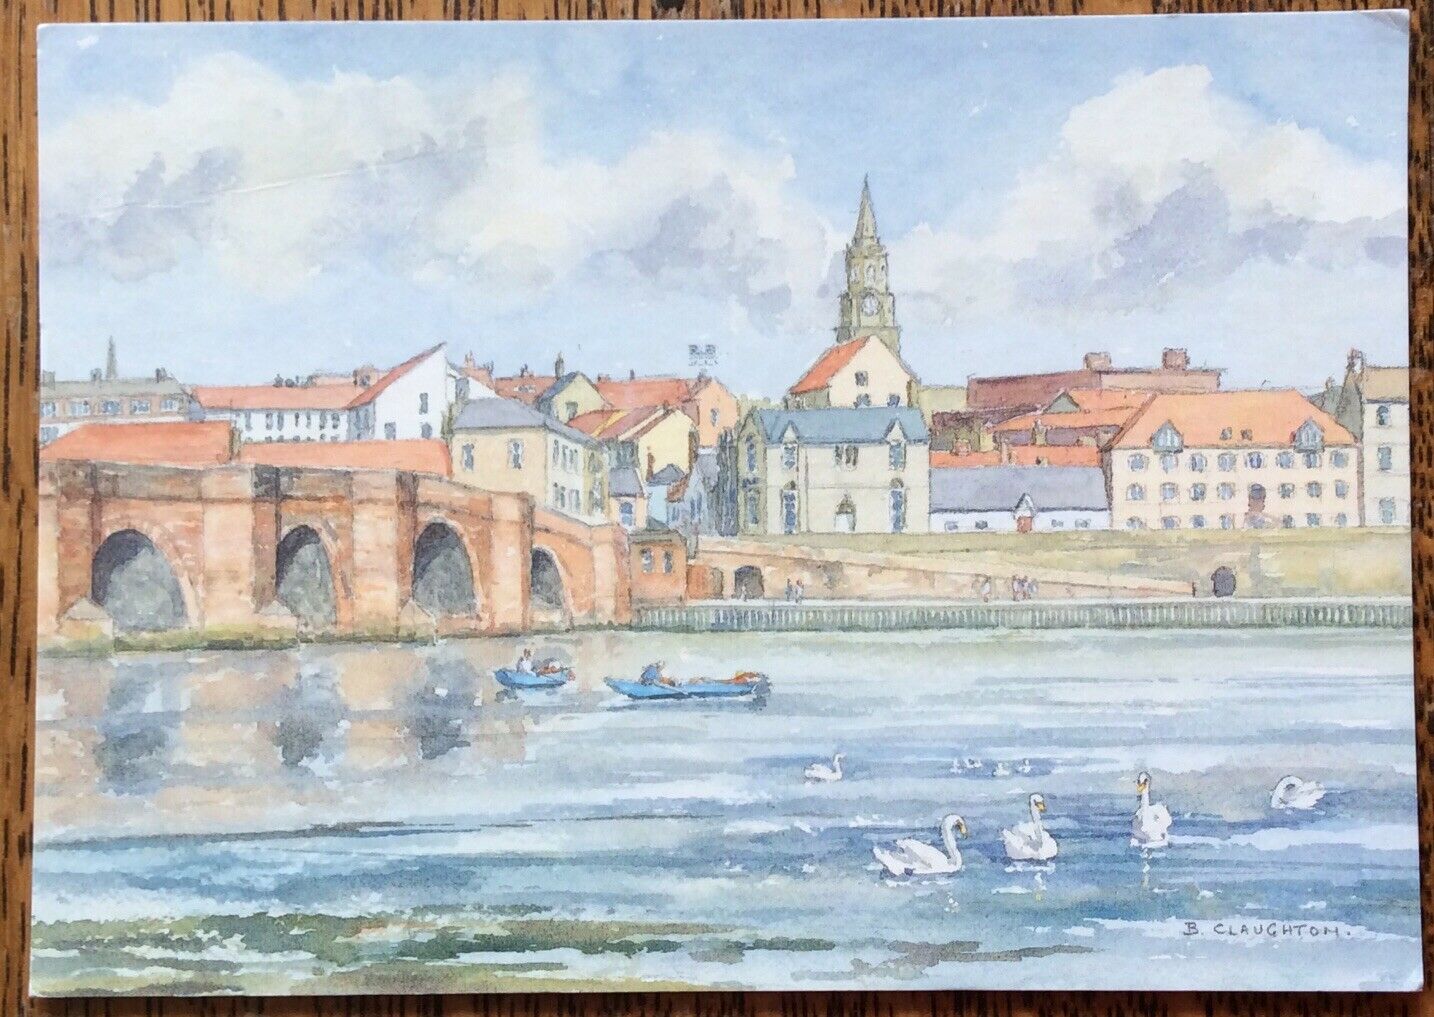 House Clearance - Berwick Upon Tweed From The River By Barry Claughton Service